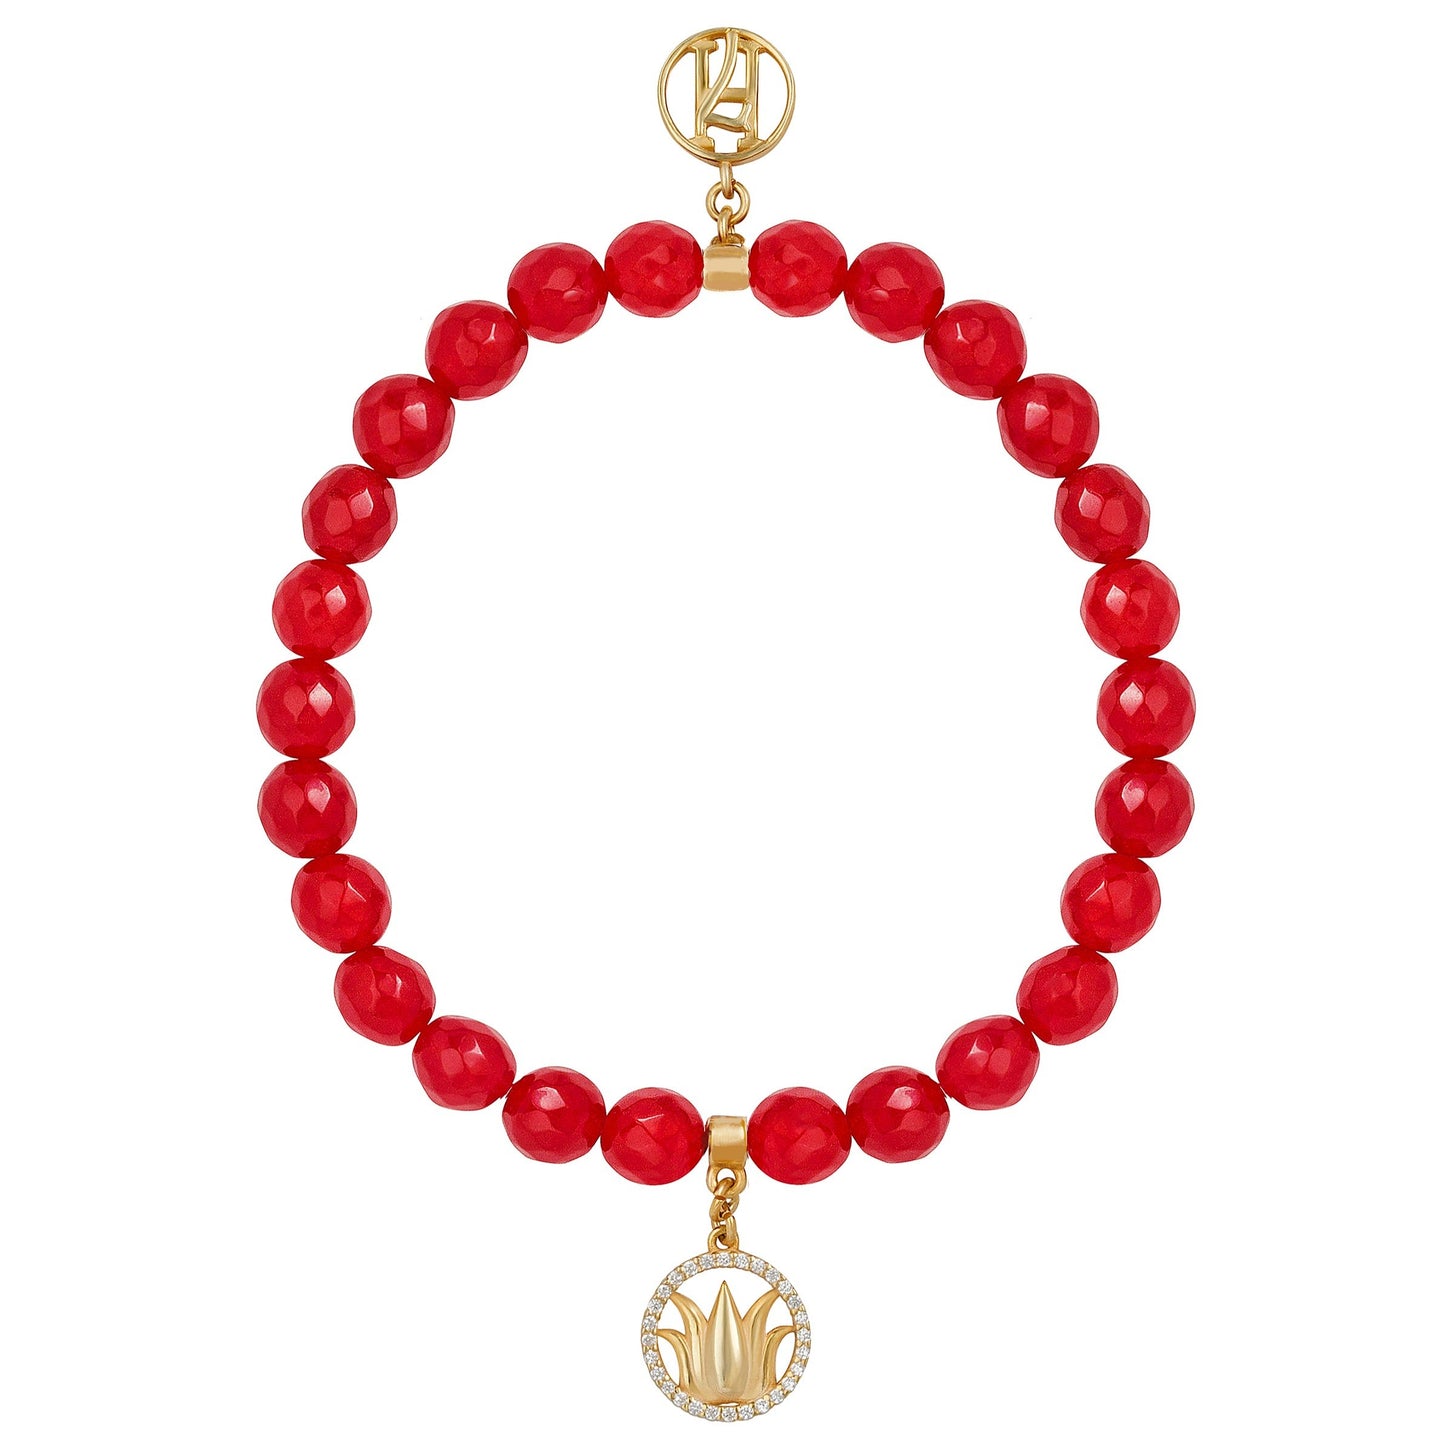 The Base Chakra 925 Sterling Silver 18kt Gold Plated Lotus Diamante Bracelet